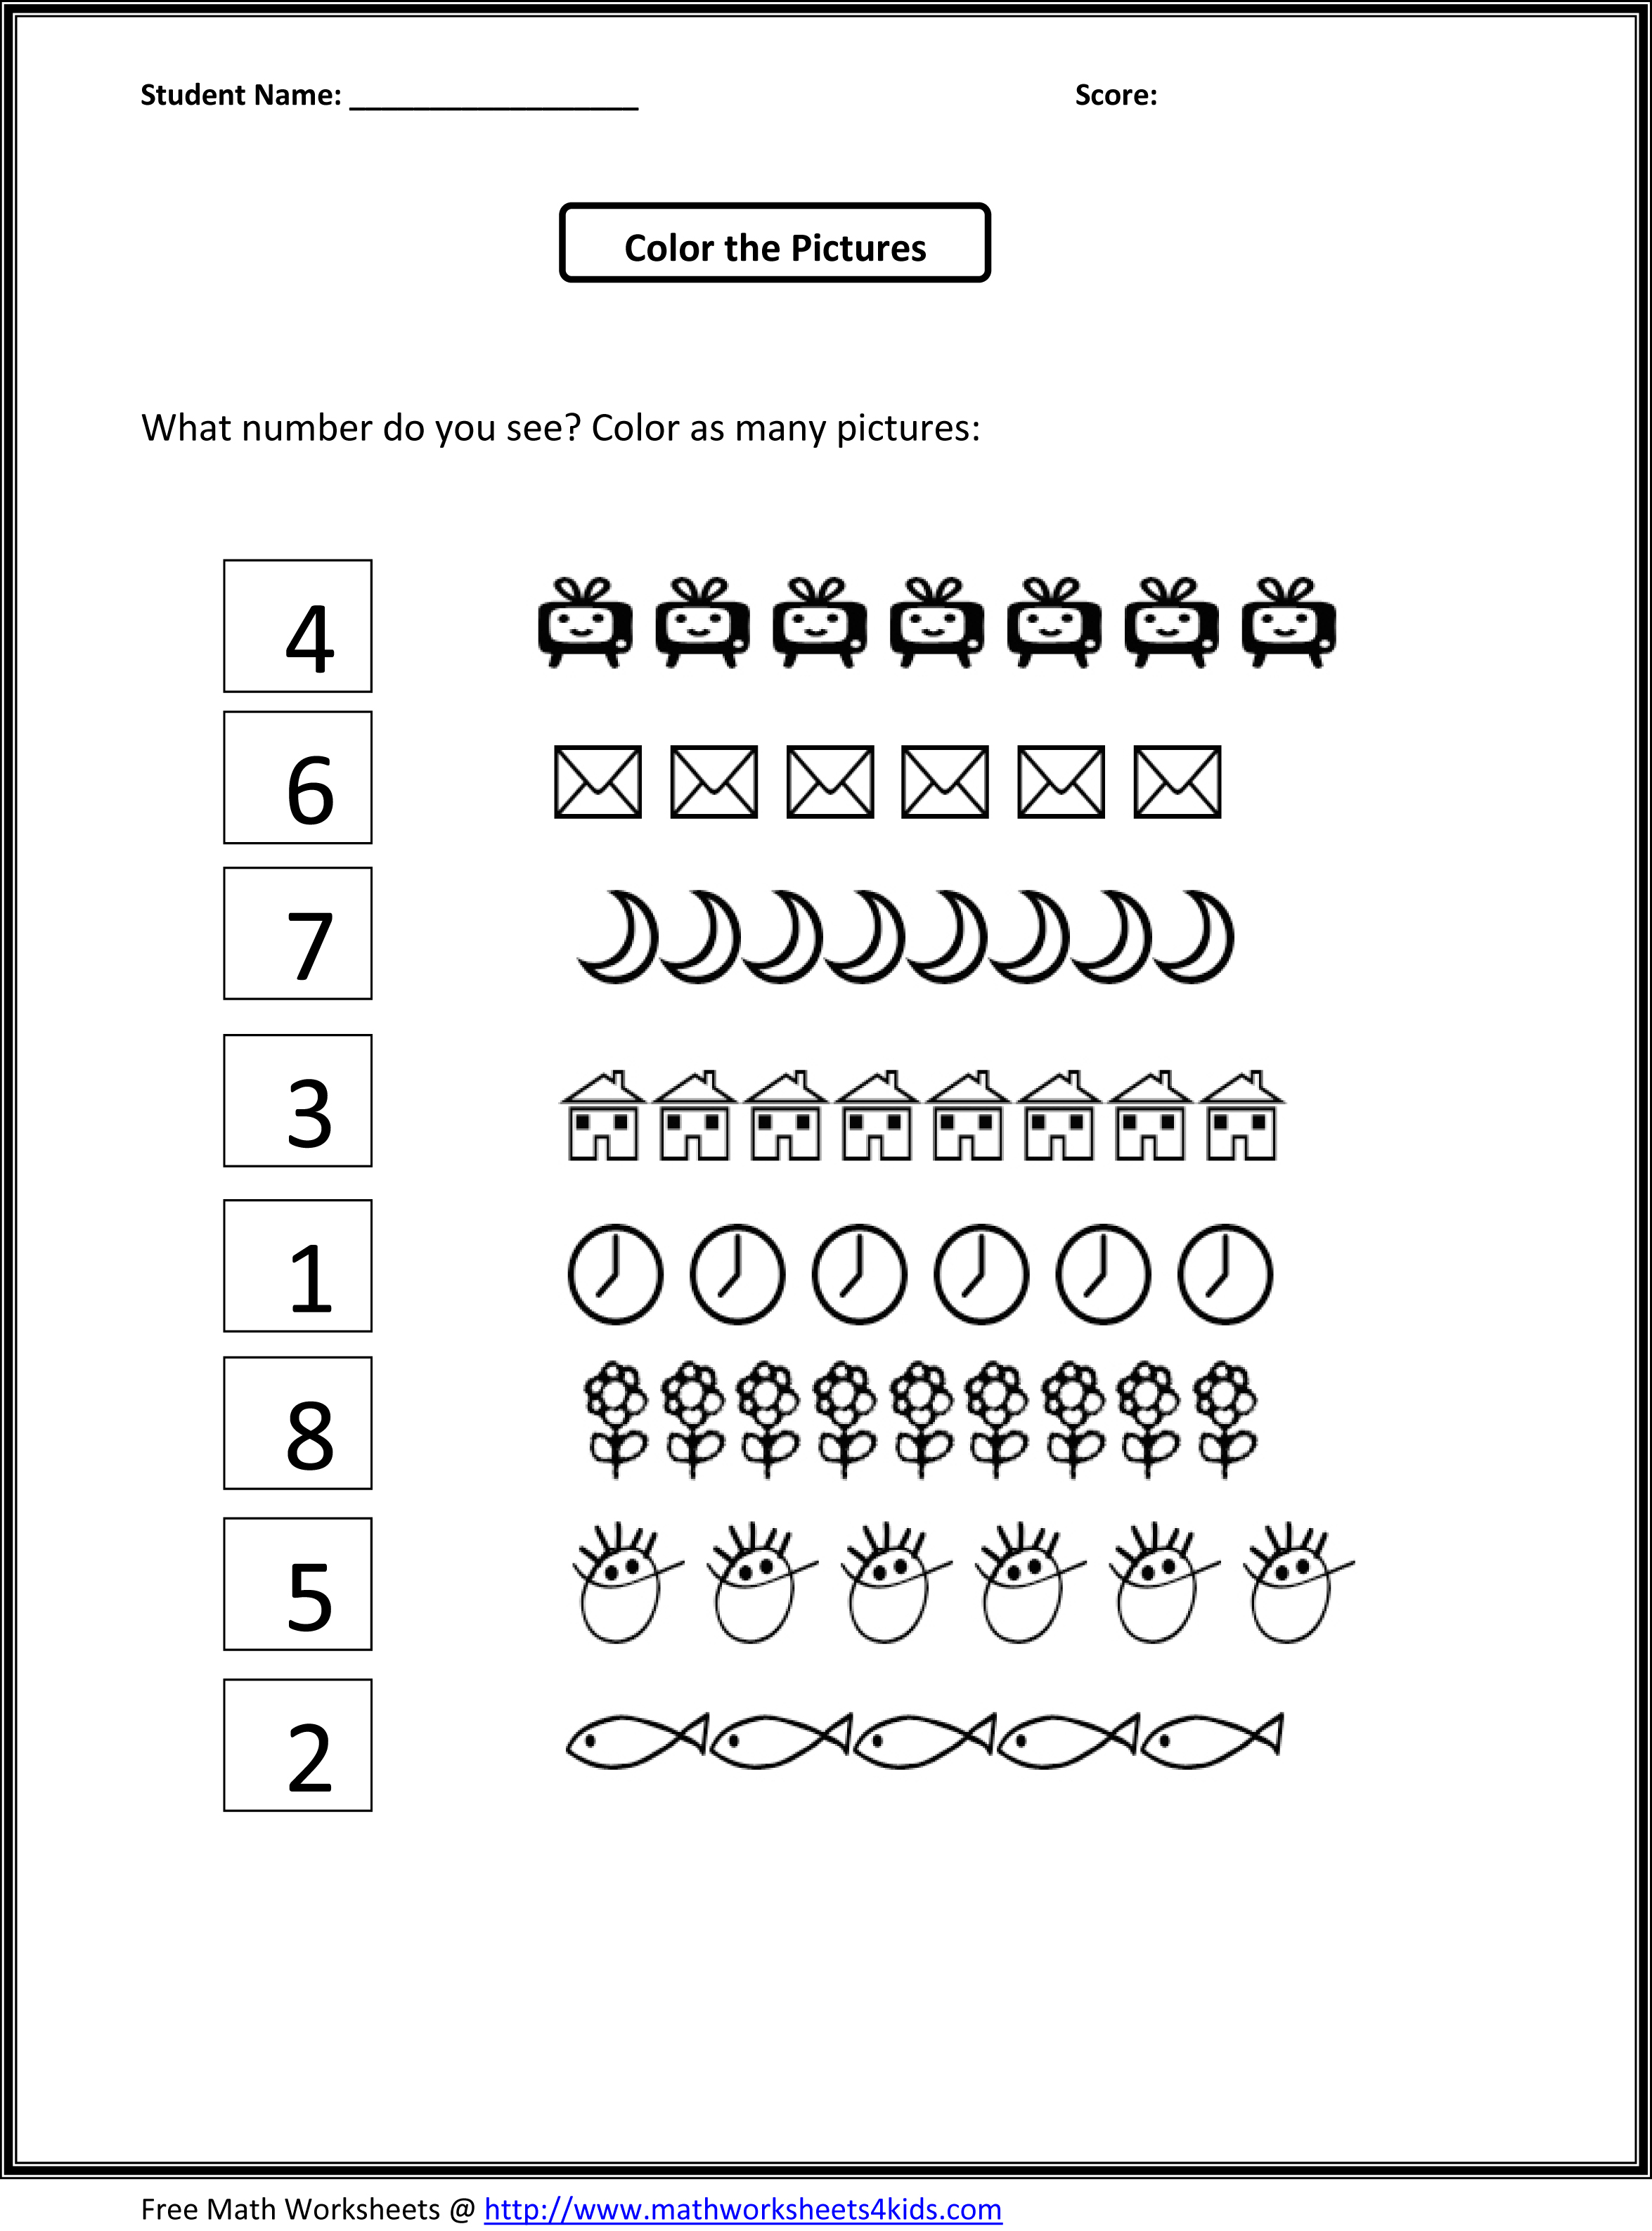 19 Best Images of Counting Numbers Worksheets Counting